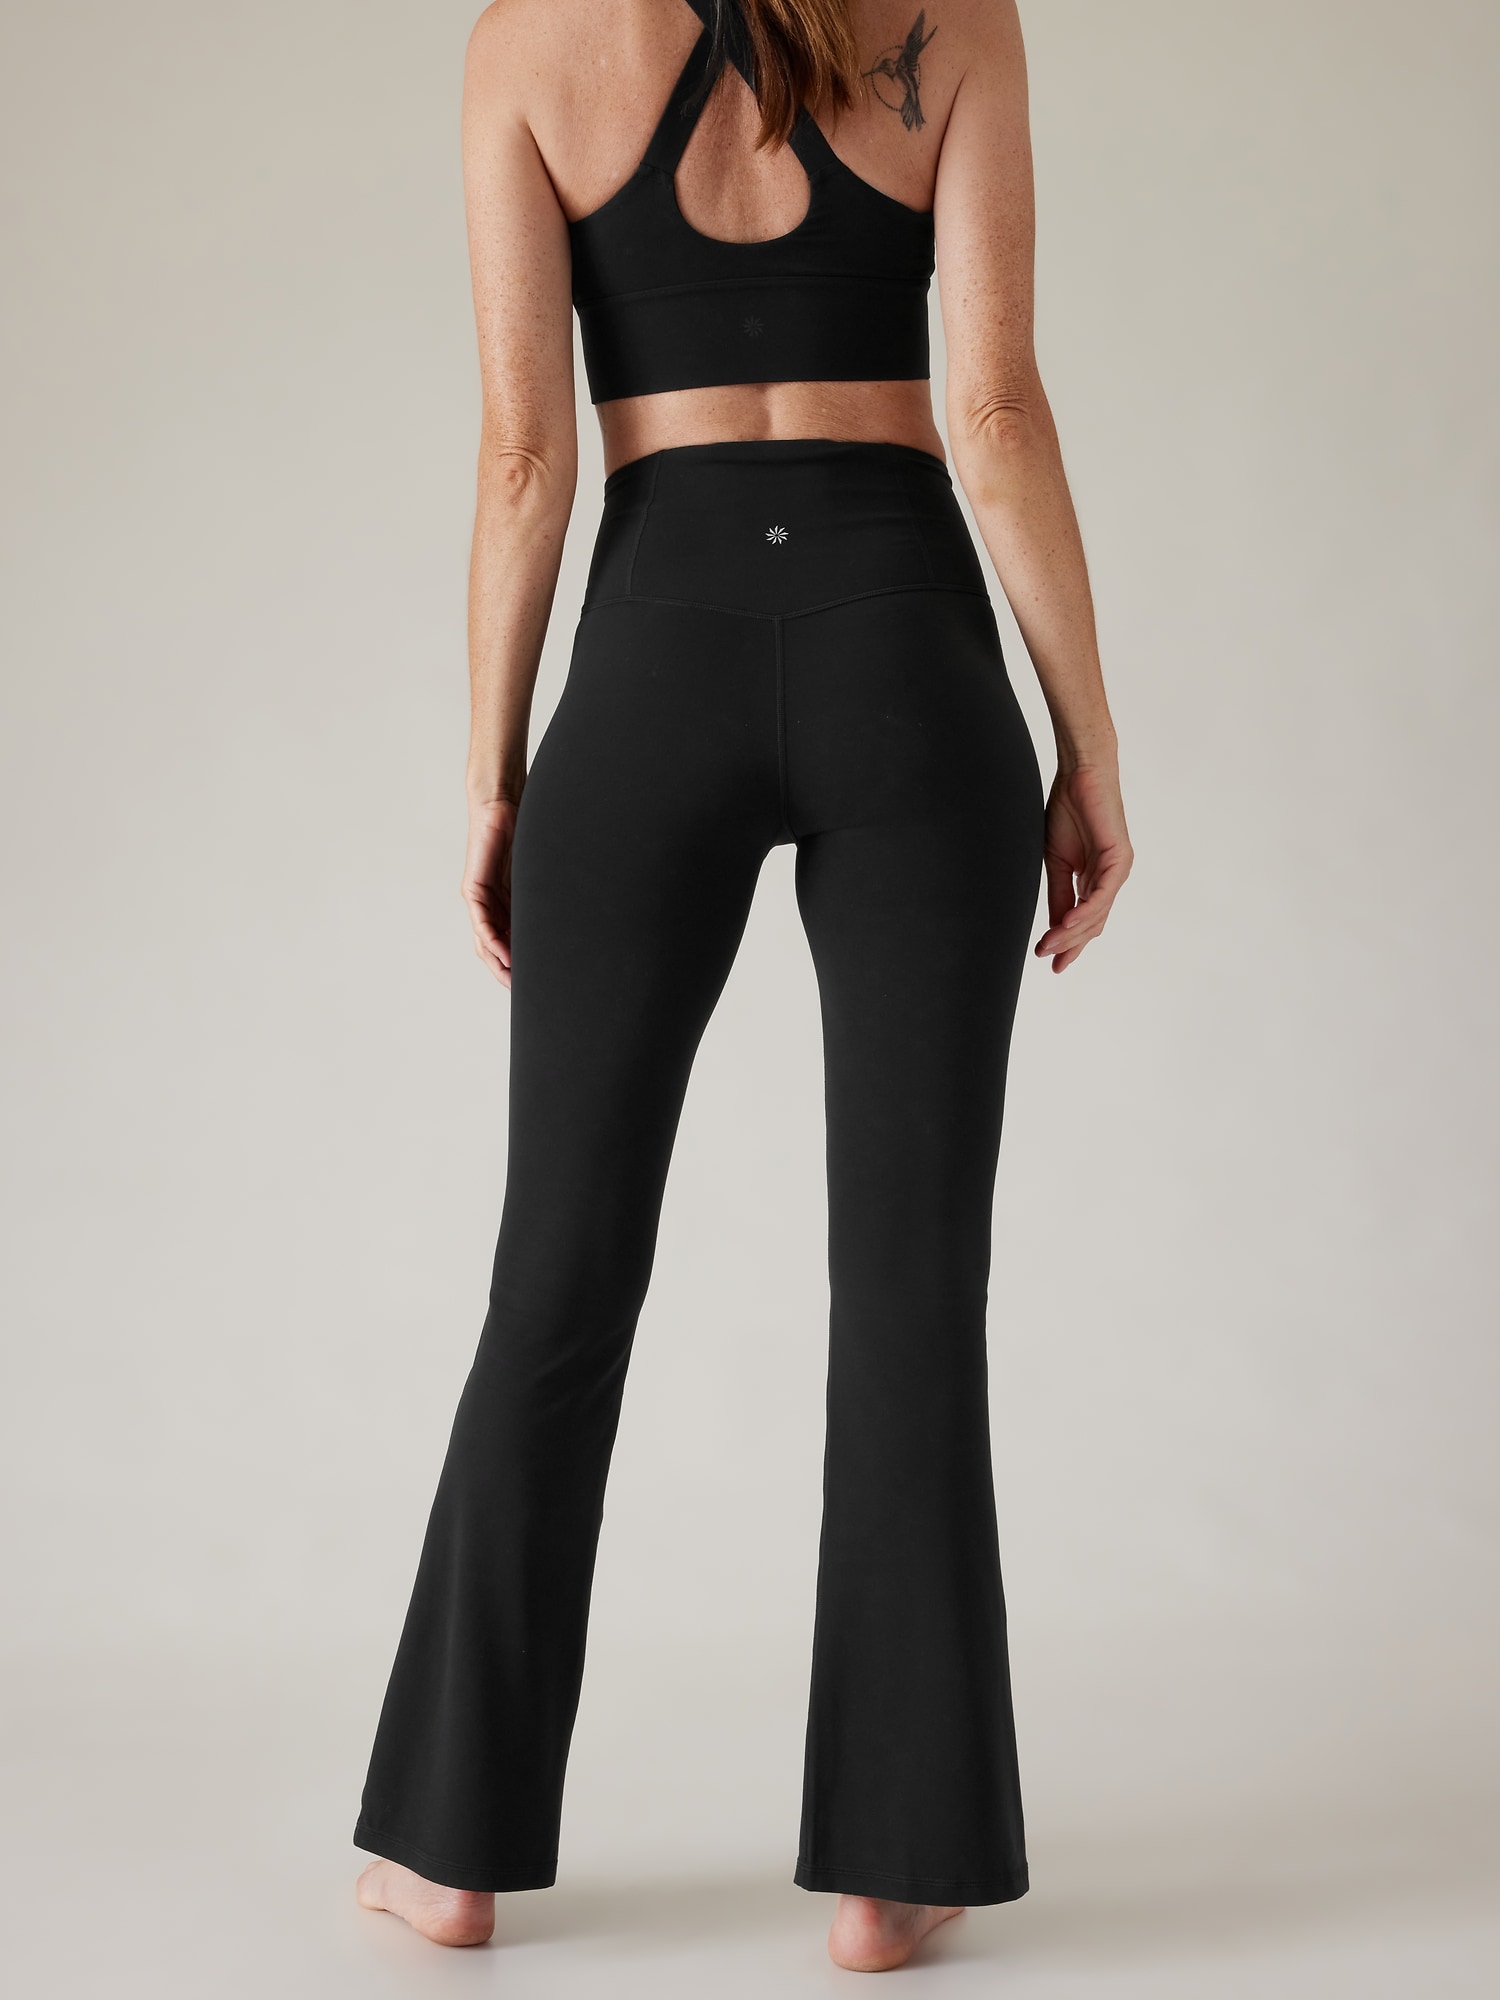 5 Black Flare Pants Outfits Because Athleta Knows Trousers - The Mom Edit